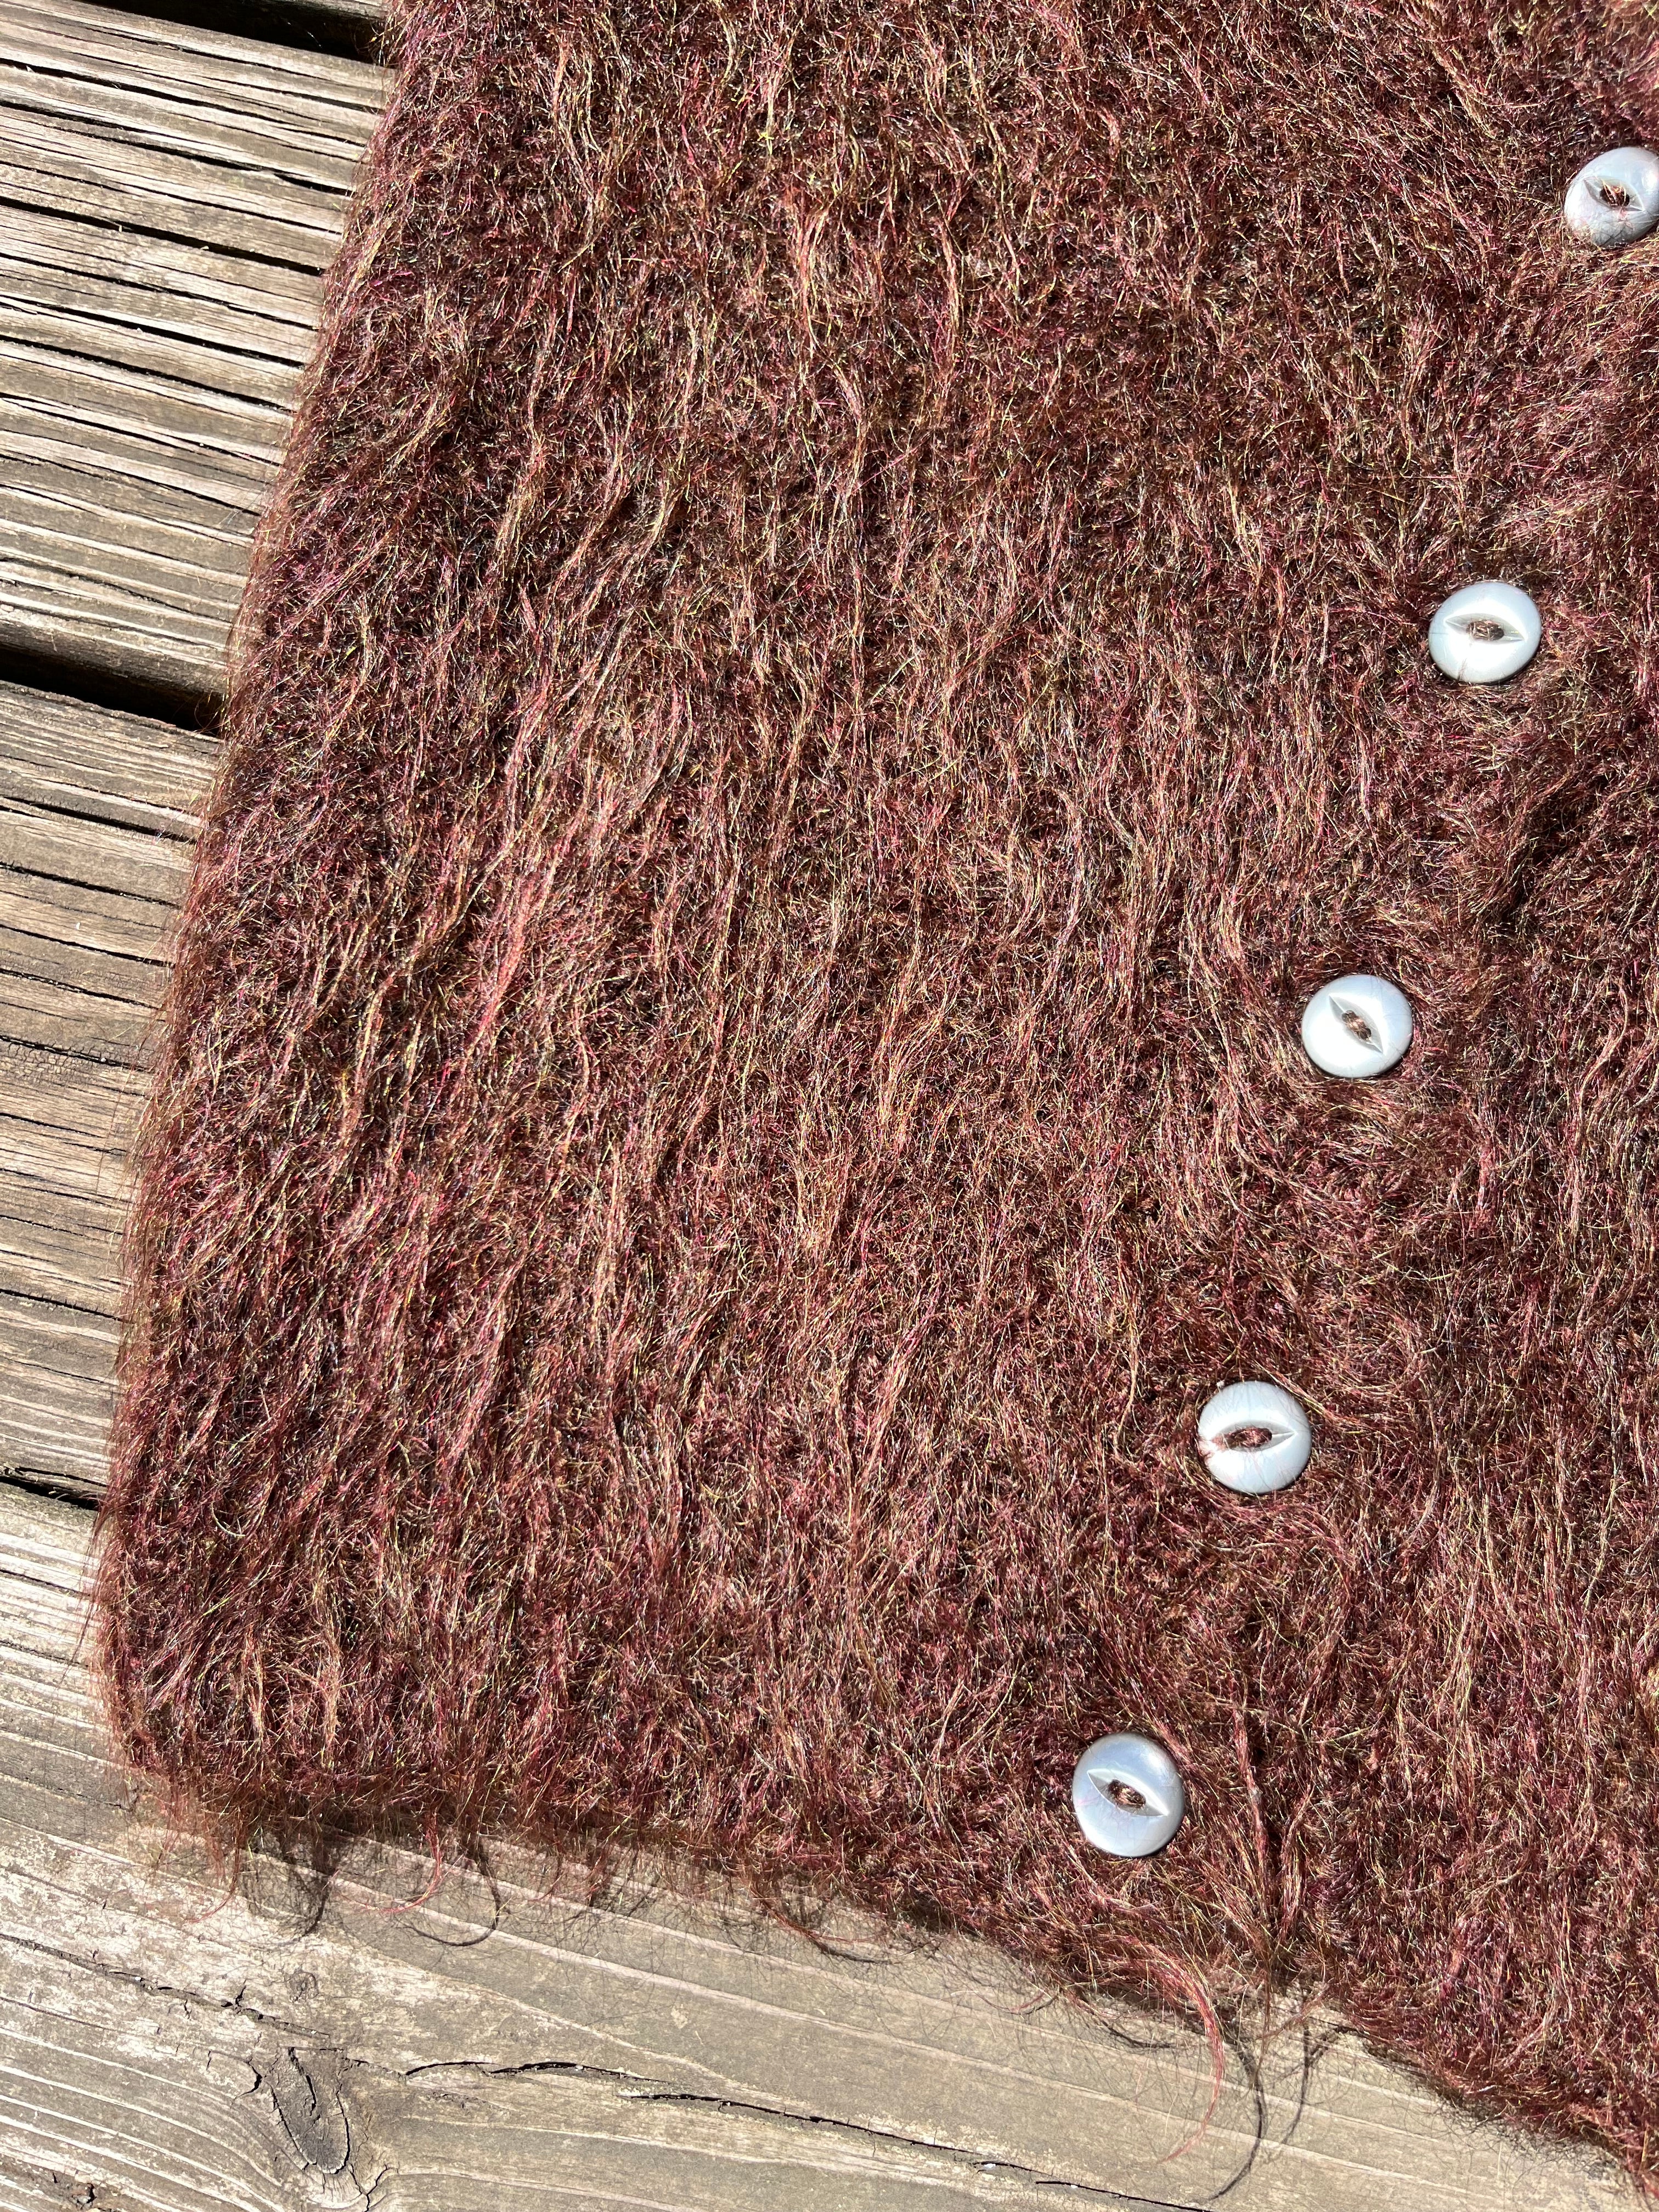 1970s Shaggy Mohair Vest - Grizzly Brown - S/M